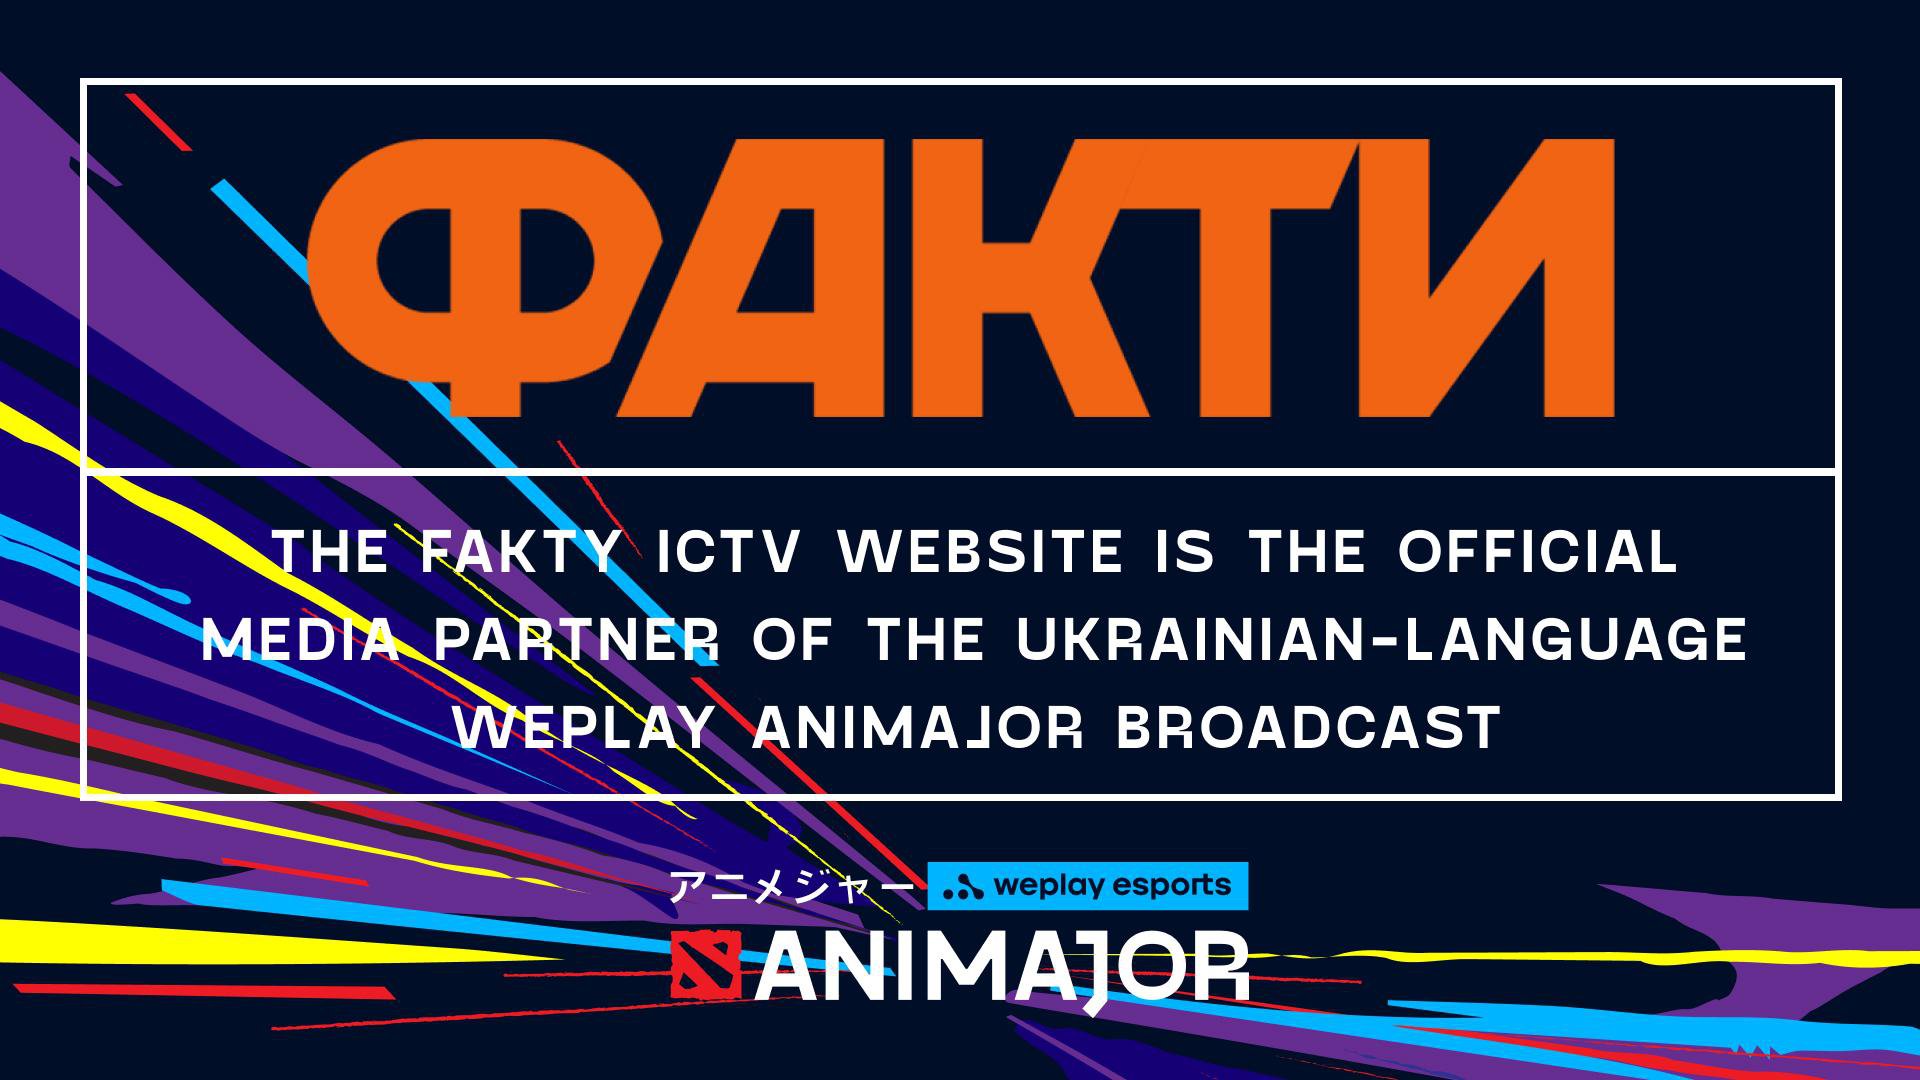 The Fakty ICTV website has become an official media partner of the Ukrainian-language broadcast of WePlay AniMajor. Image: WePlay Holding